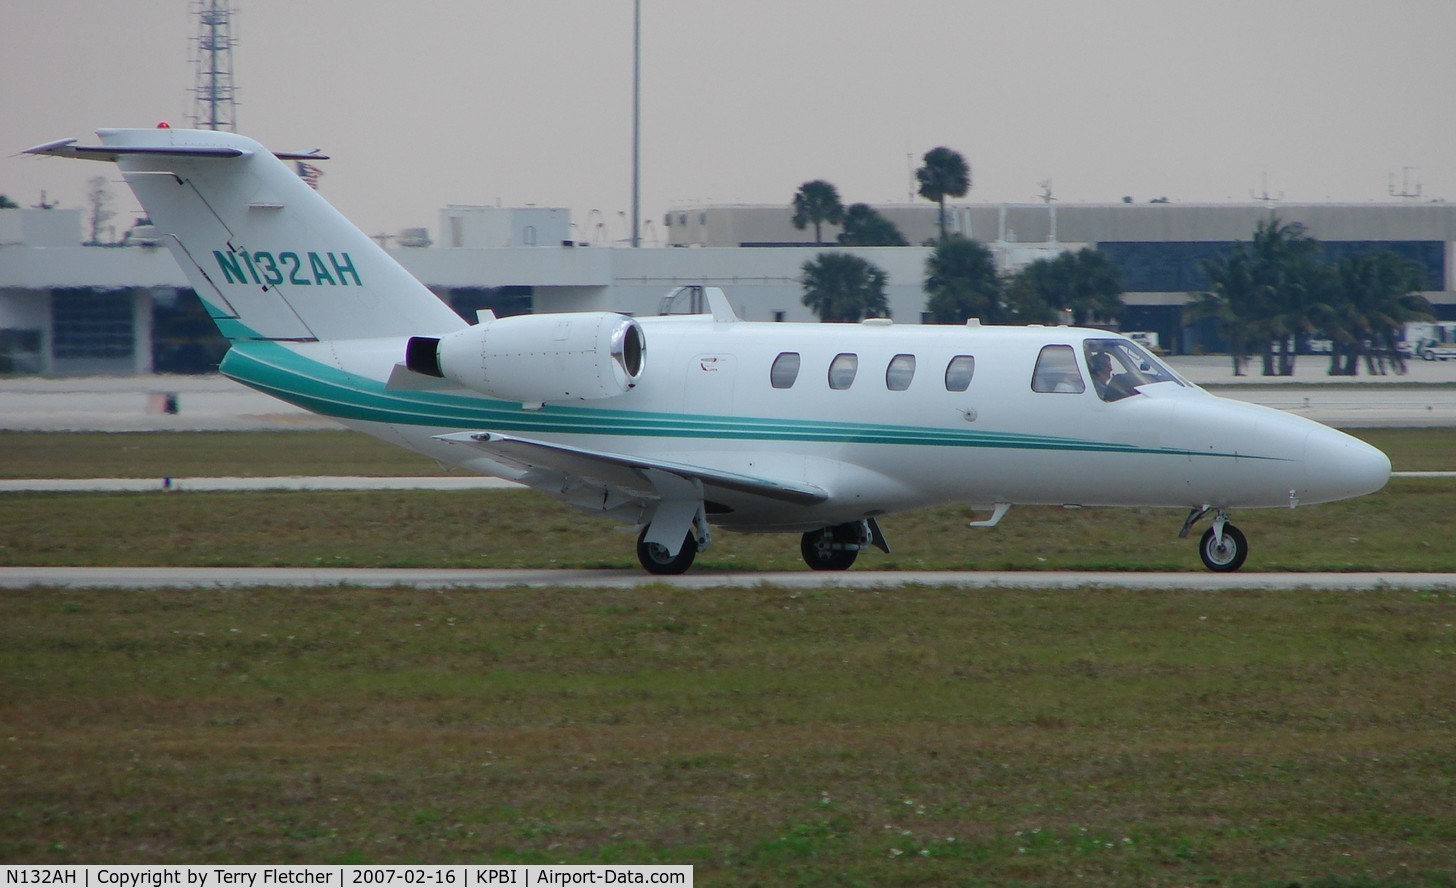 N132AH, 1996 Cessna 525 CitationJet C/N 525-0132, part of the Friday afternoon arrivals 'rush' at PBI